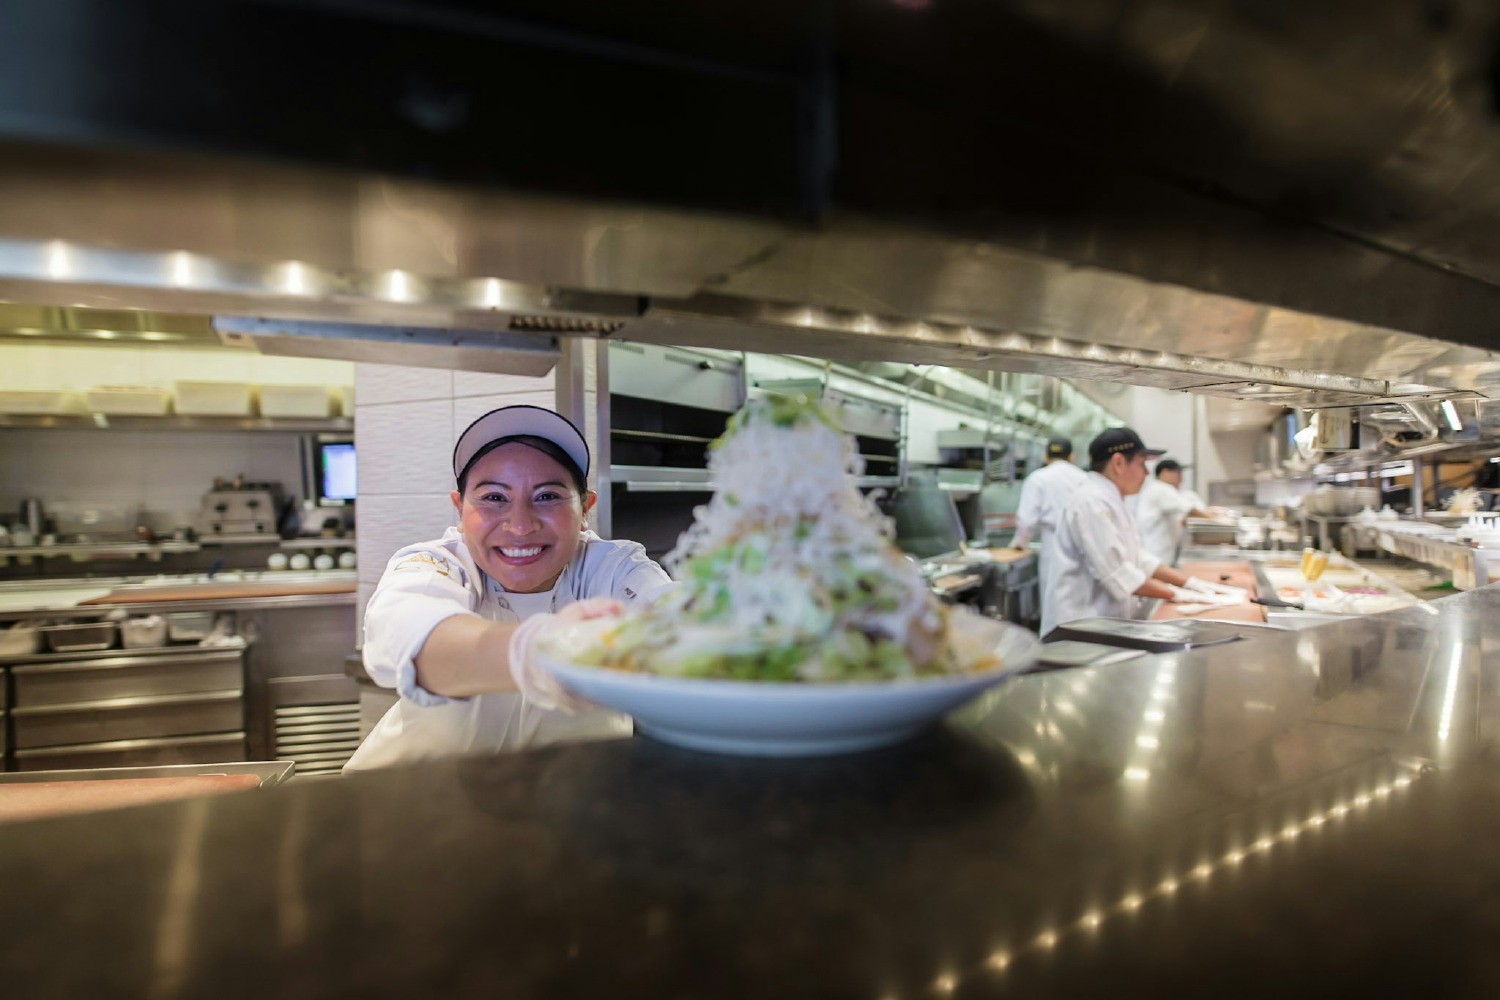 A passion for excellence fuels our kitchen teams, who make more than 250 delicious menu items from scratch, every day.